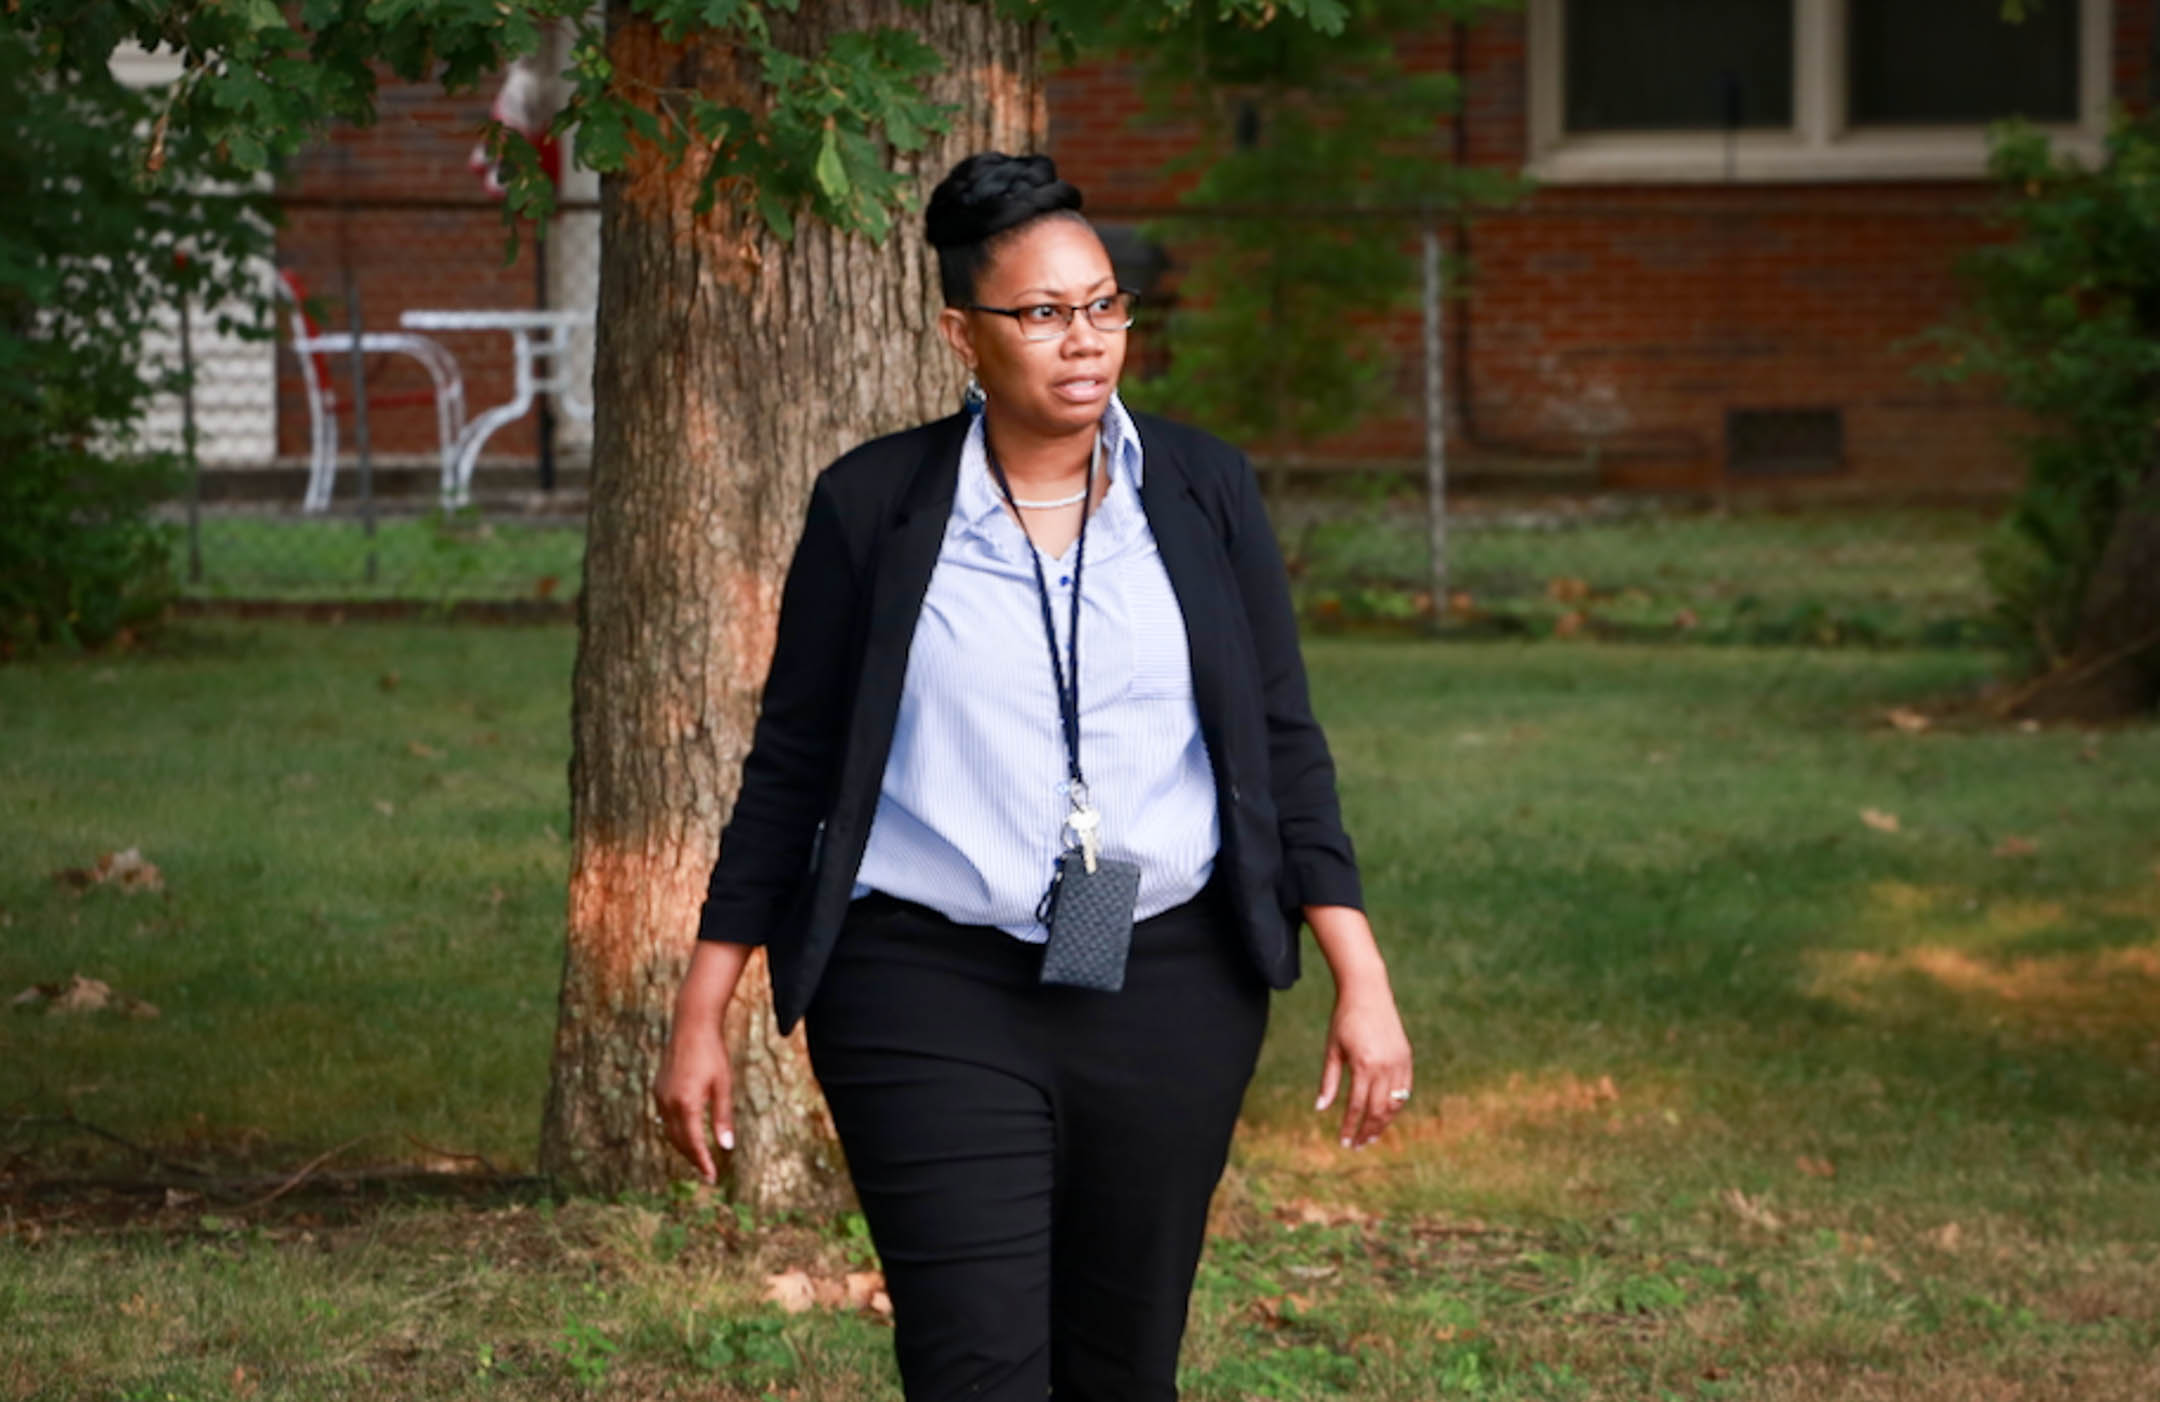 Teresa Spann, the principal at McNabb Elementary School (Paducah Independent), takes a walk around the school grounds. Such walks are among the self-care techniques Spann practices. She said she has come to realize the value of self-care, which can take a number of forms. Submitted photo by Wayne Walden